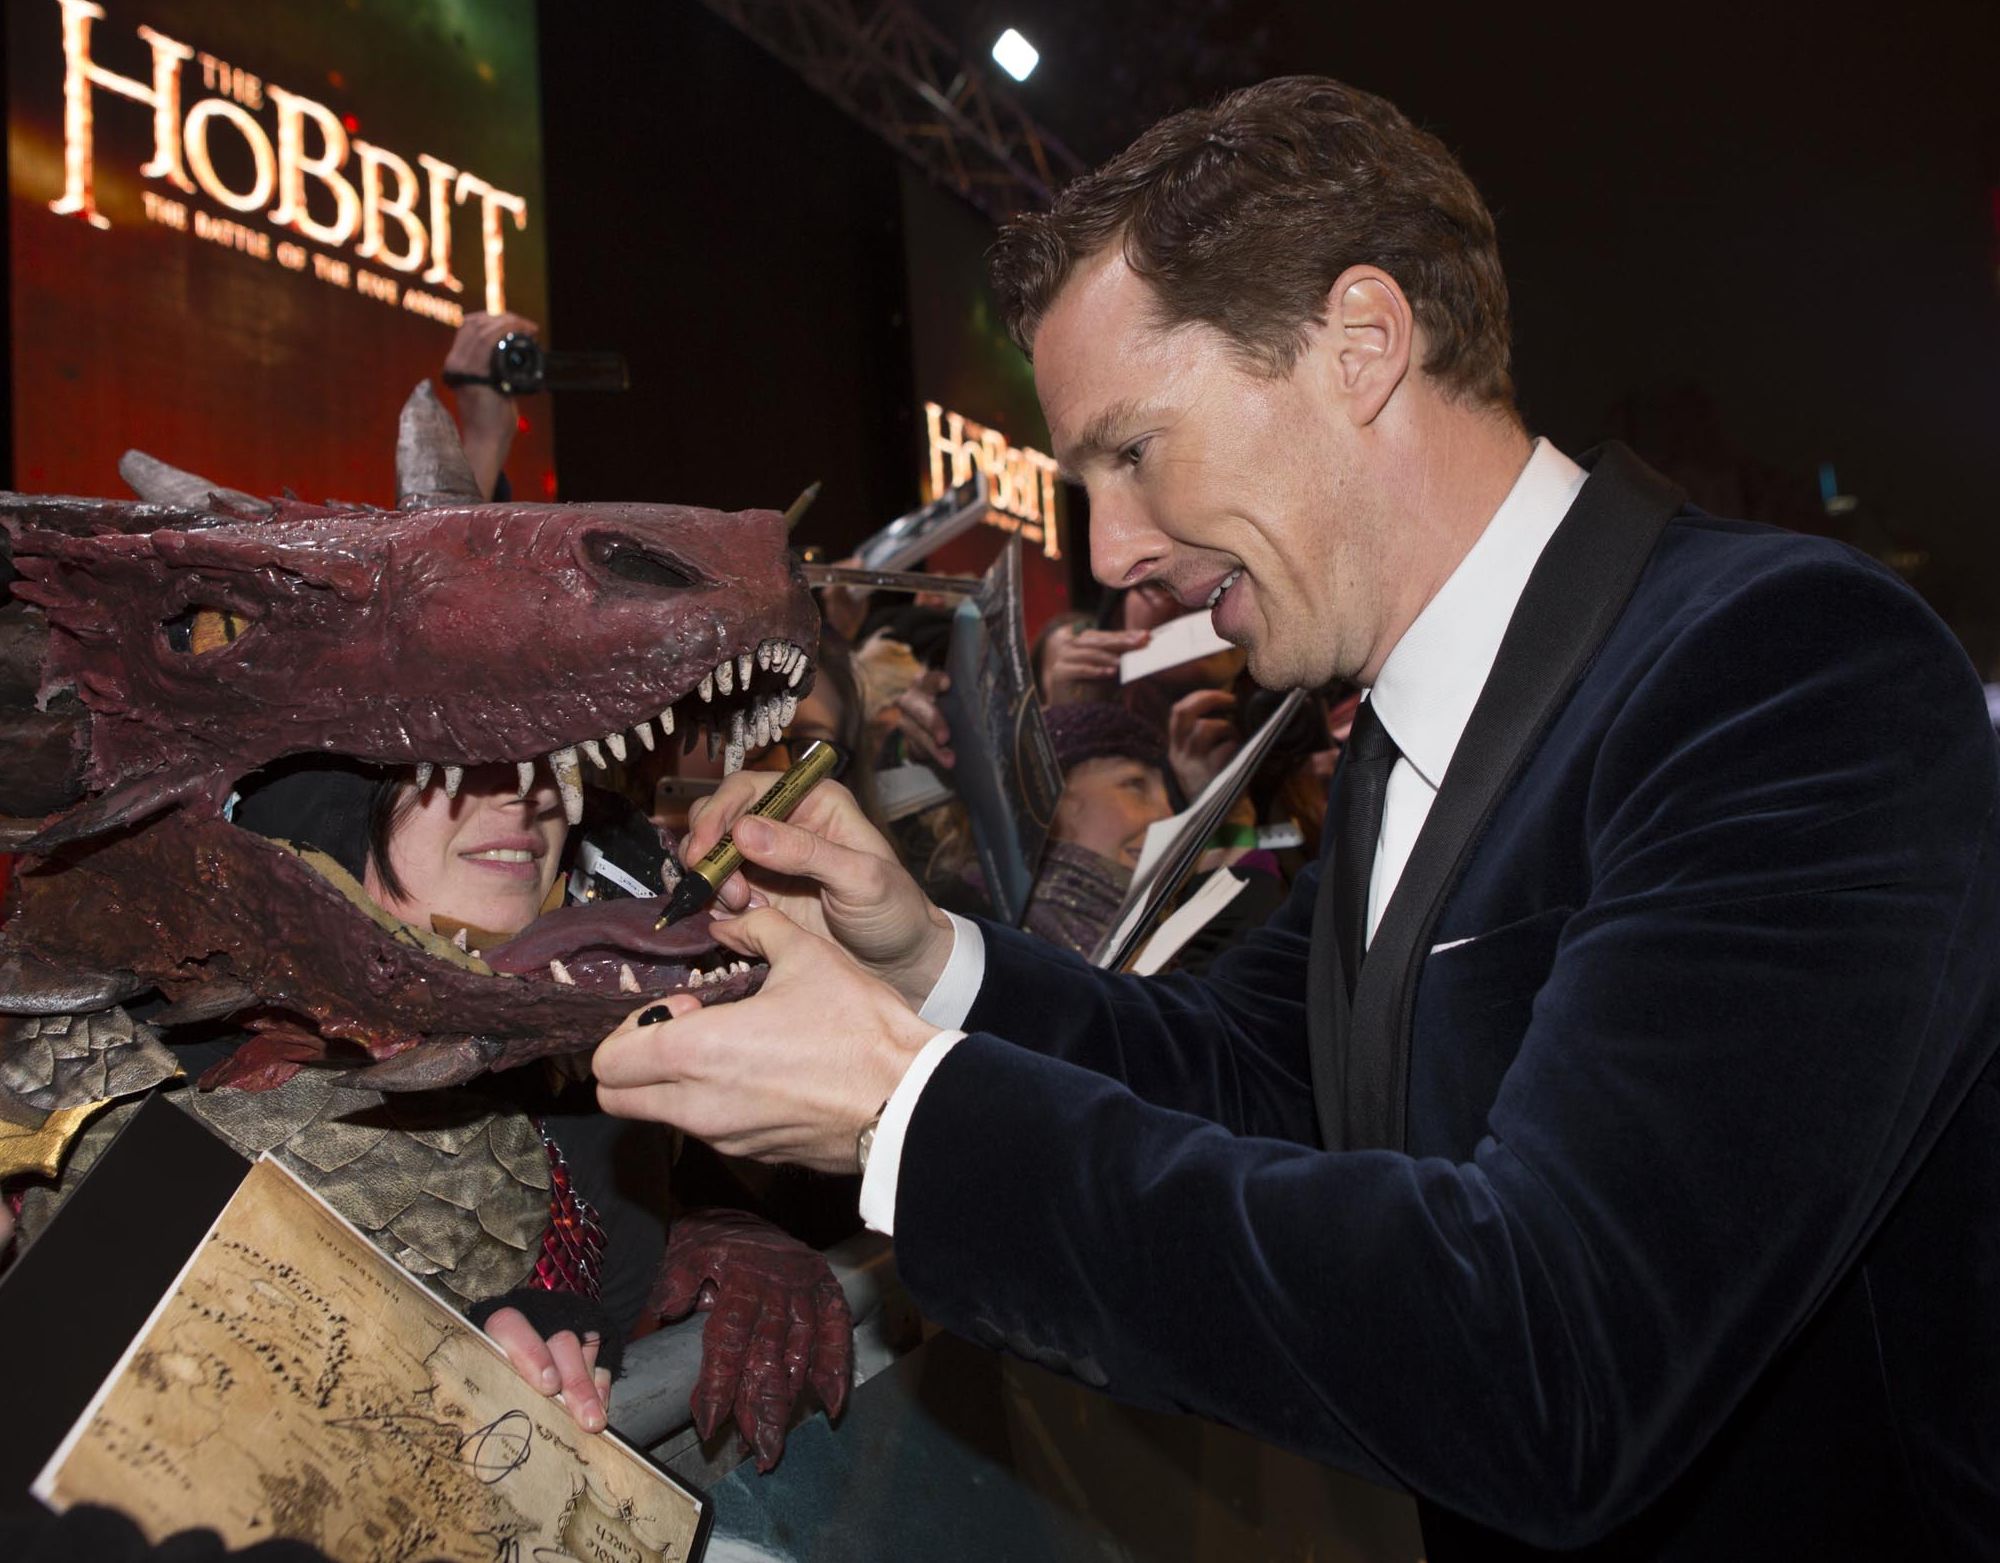 Benedict Cumberbatch at The Hobbit: The Battle of the Five Armies